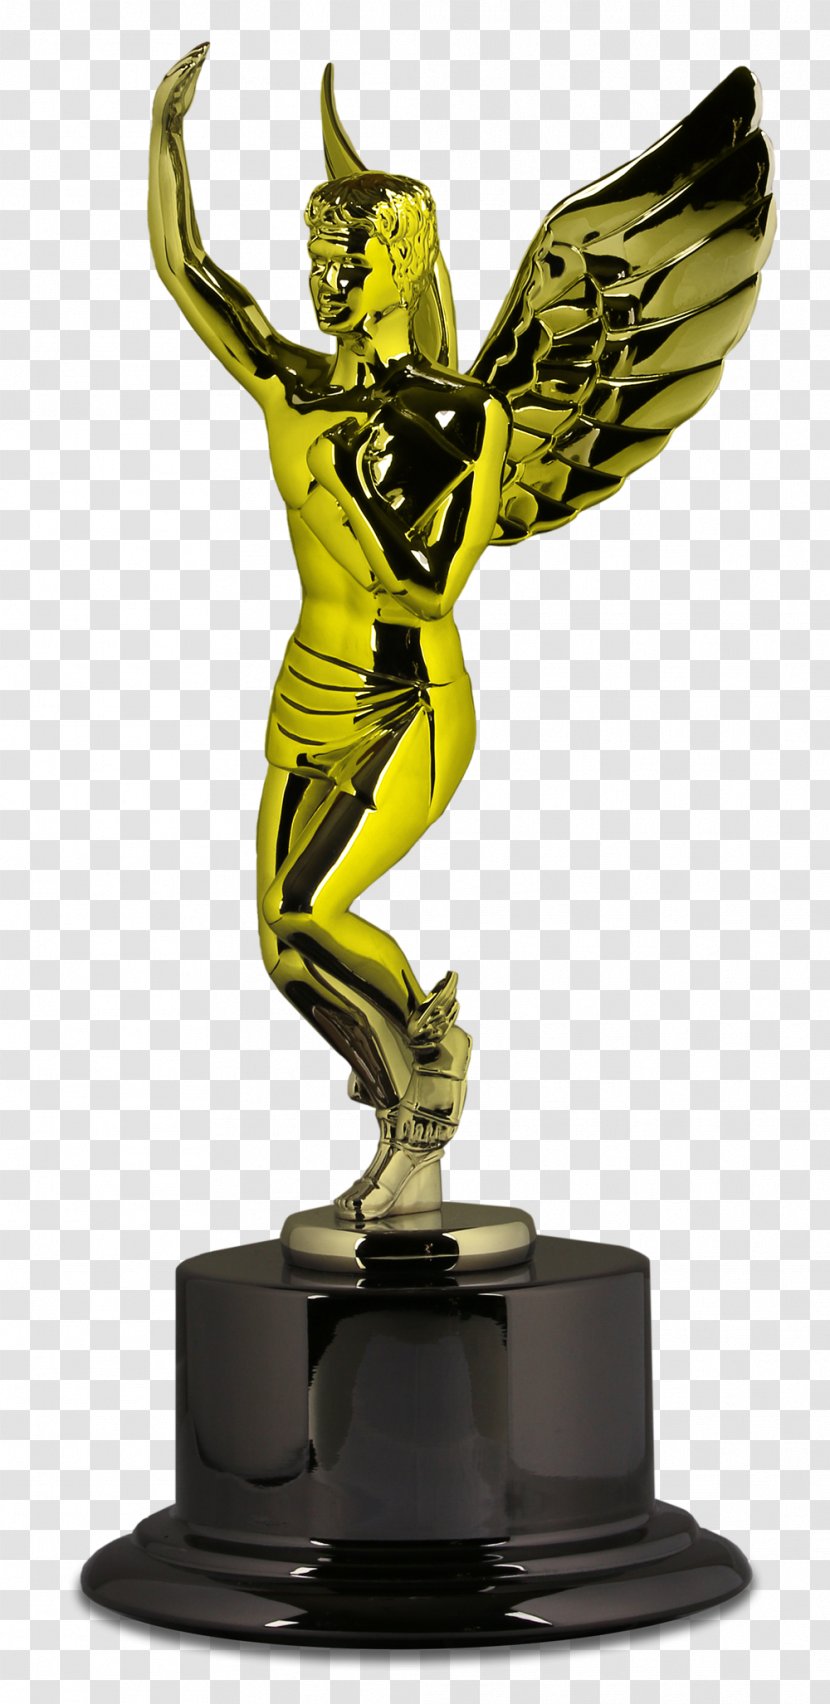 Hermes Creative Awards Competition Advertising Creativity - Concept - Award Transparent PNG